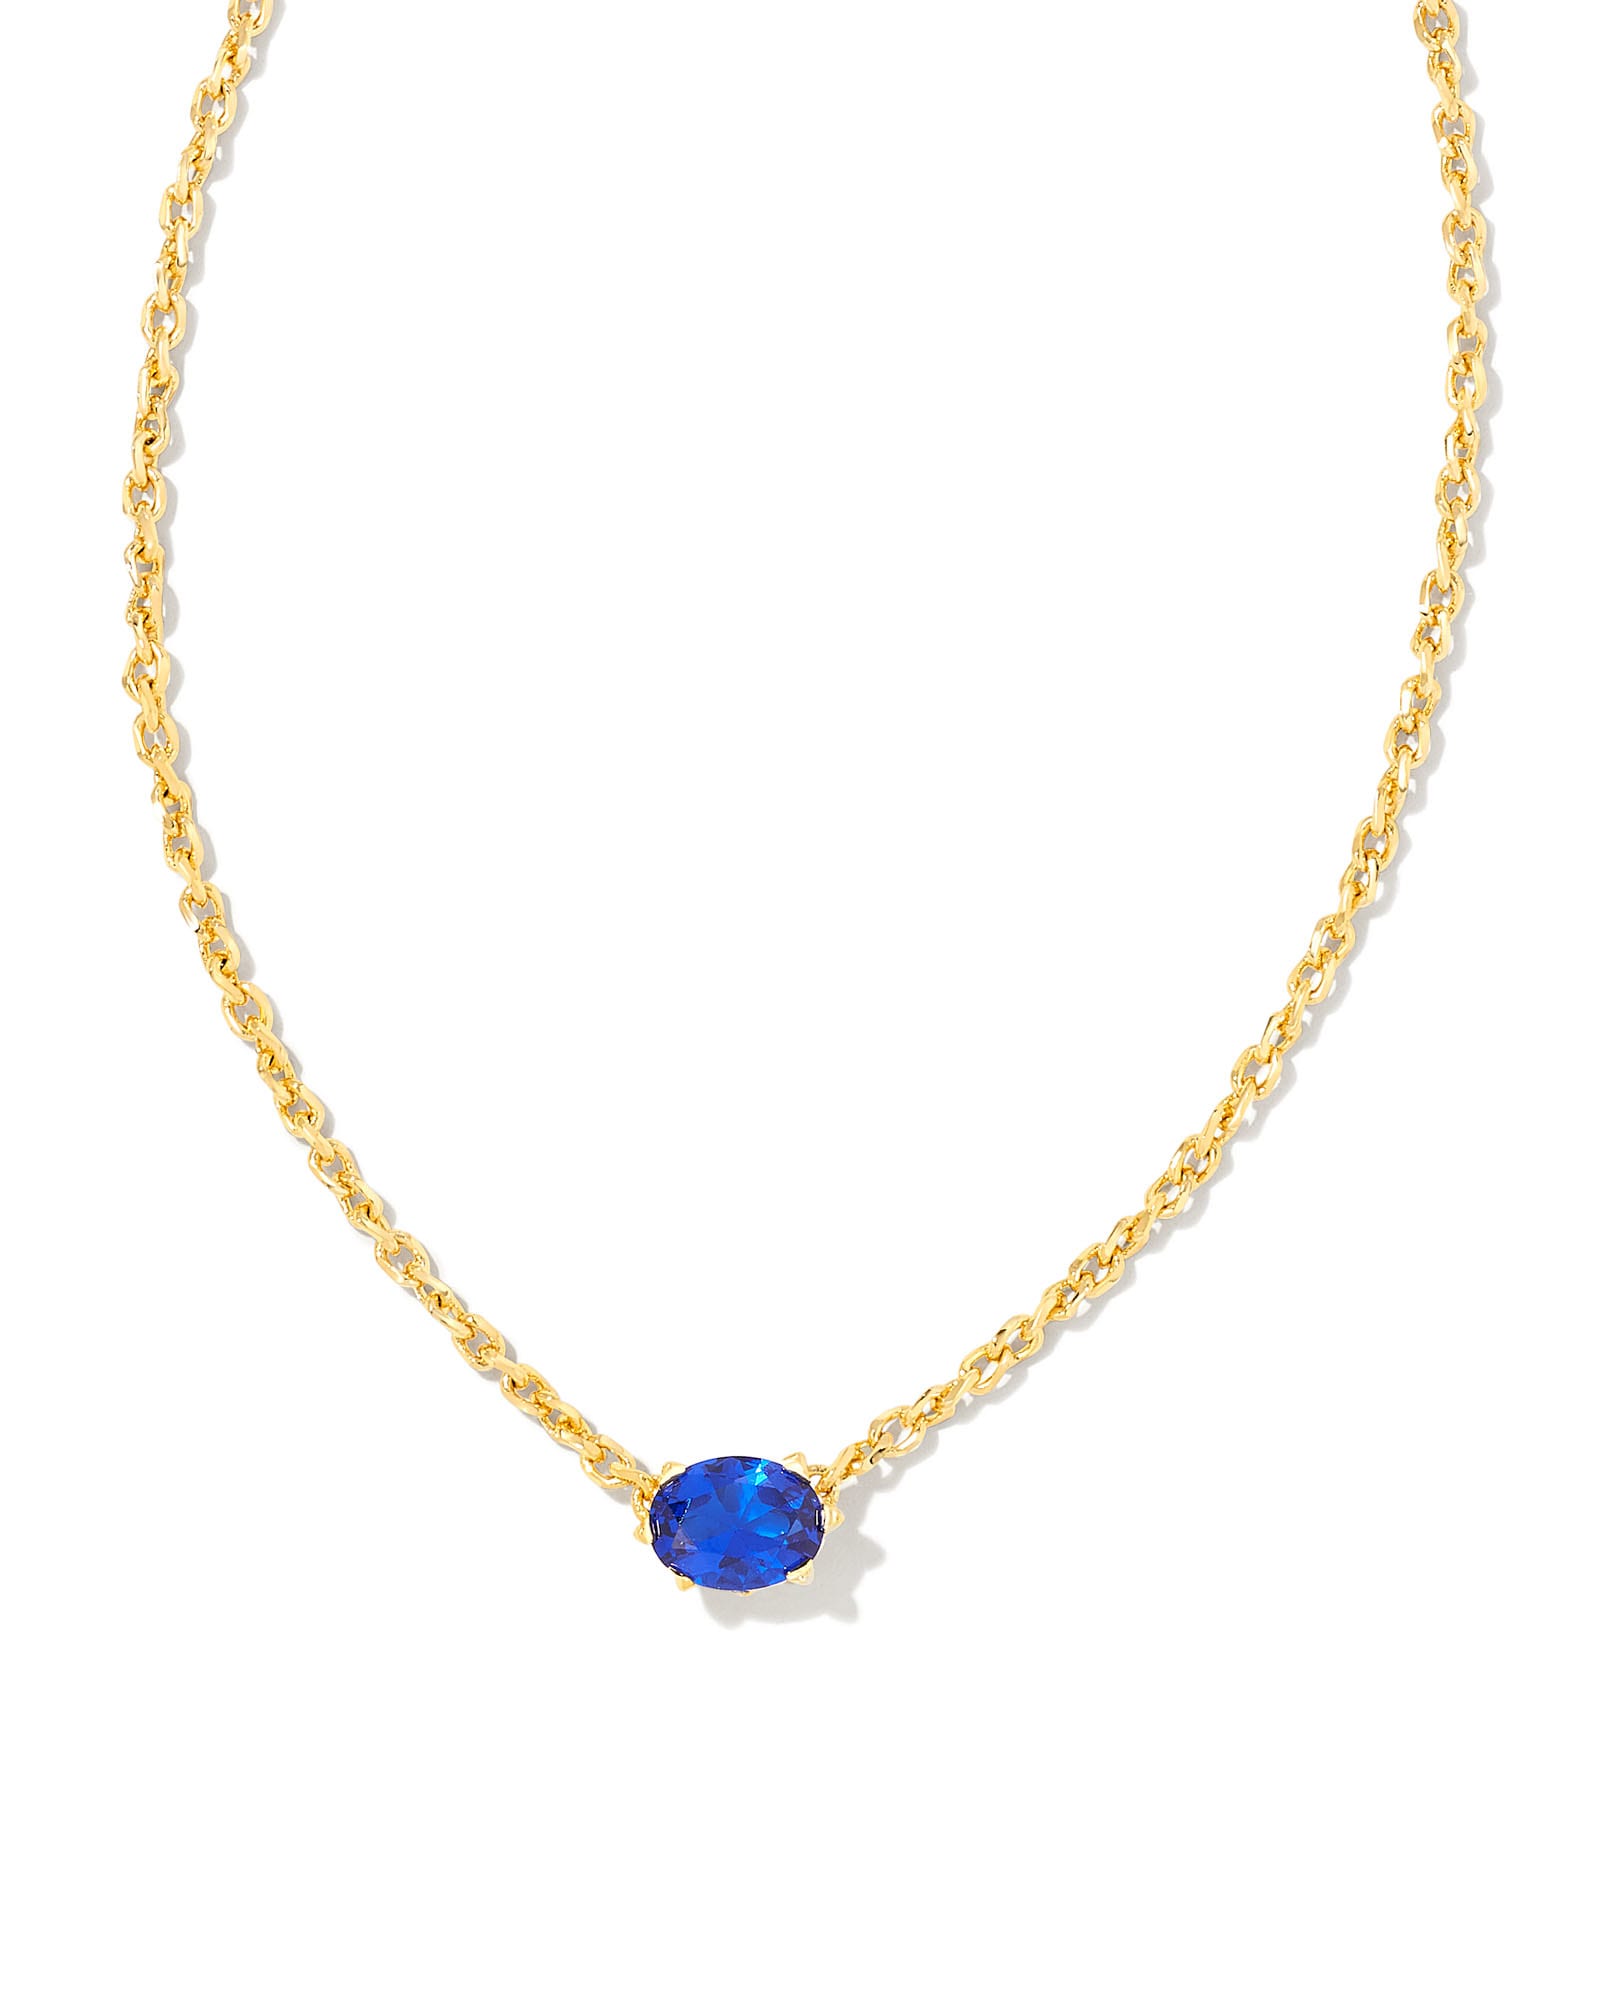 Cailin Gold Pendant Necklace in Blue Crystal (September)